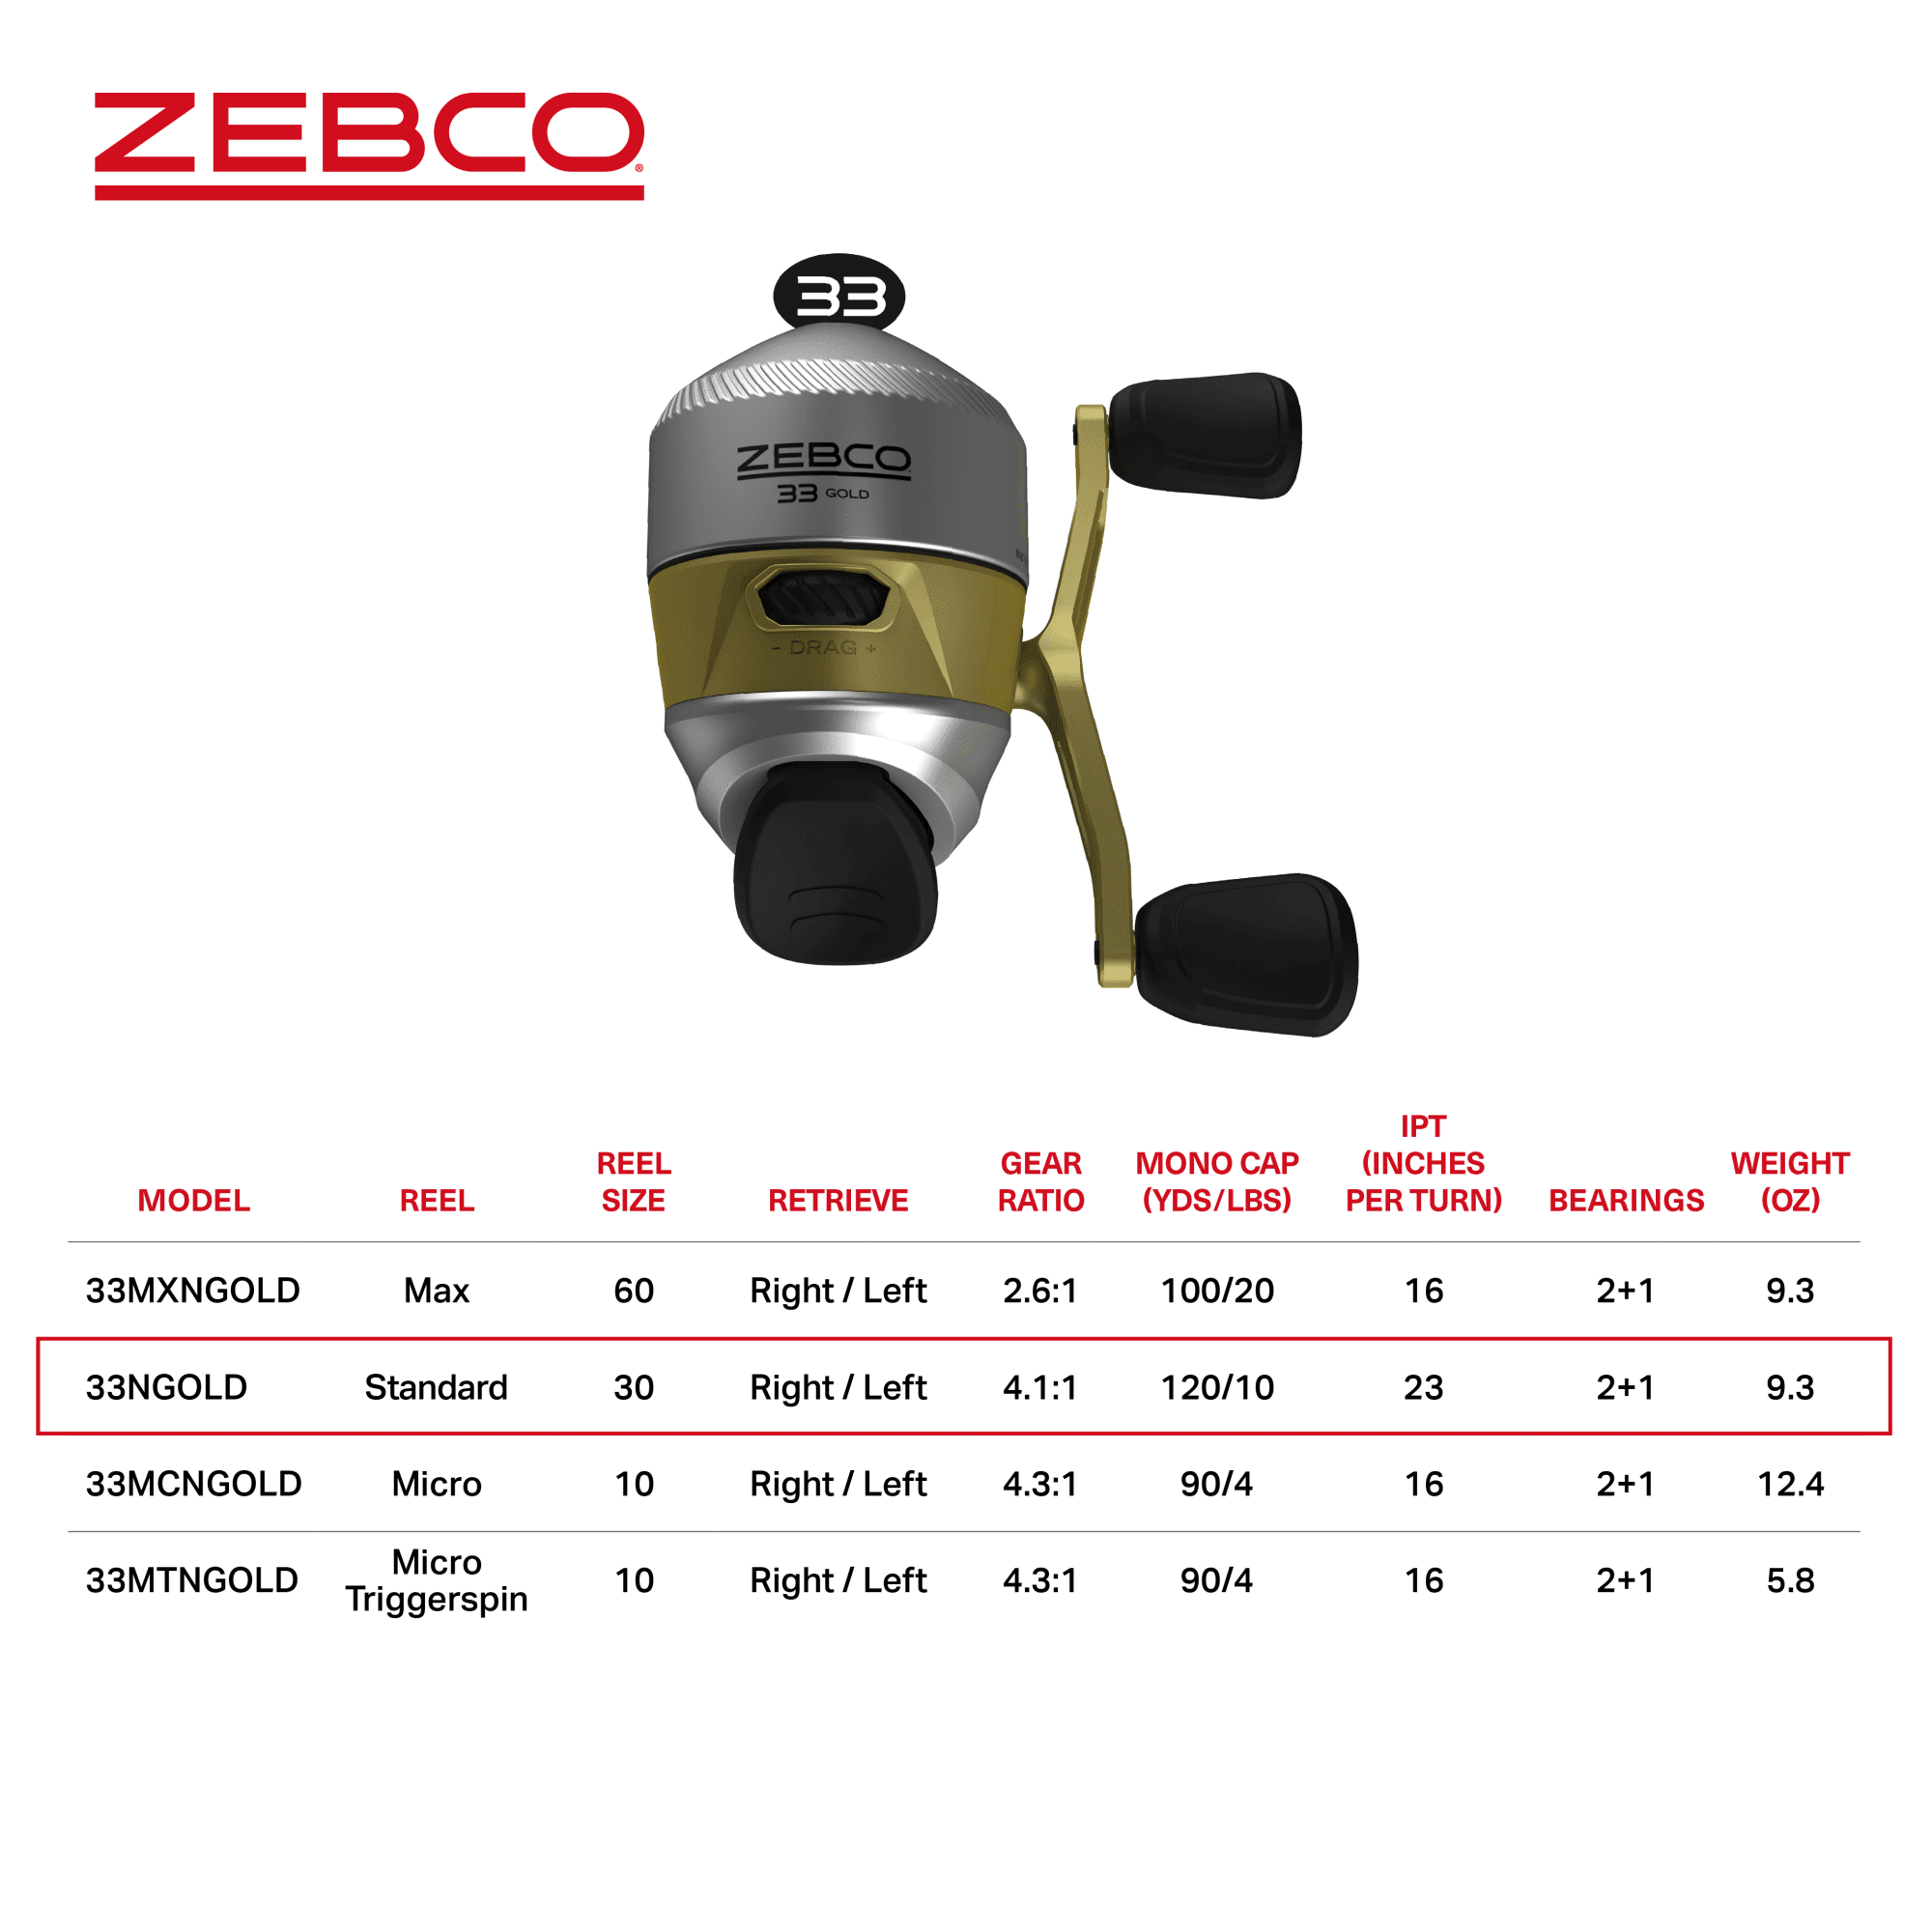 Zebco 33 Gold Micro Trigger Spincast Fishing Reel, Size 10 Reel